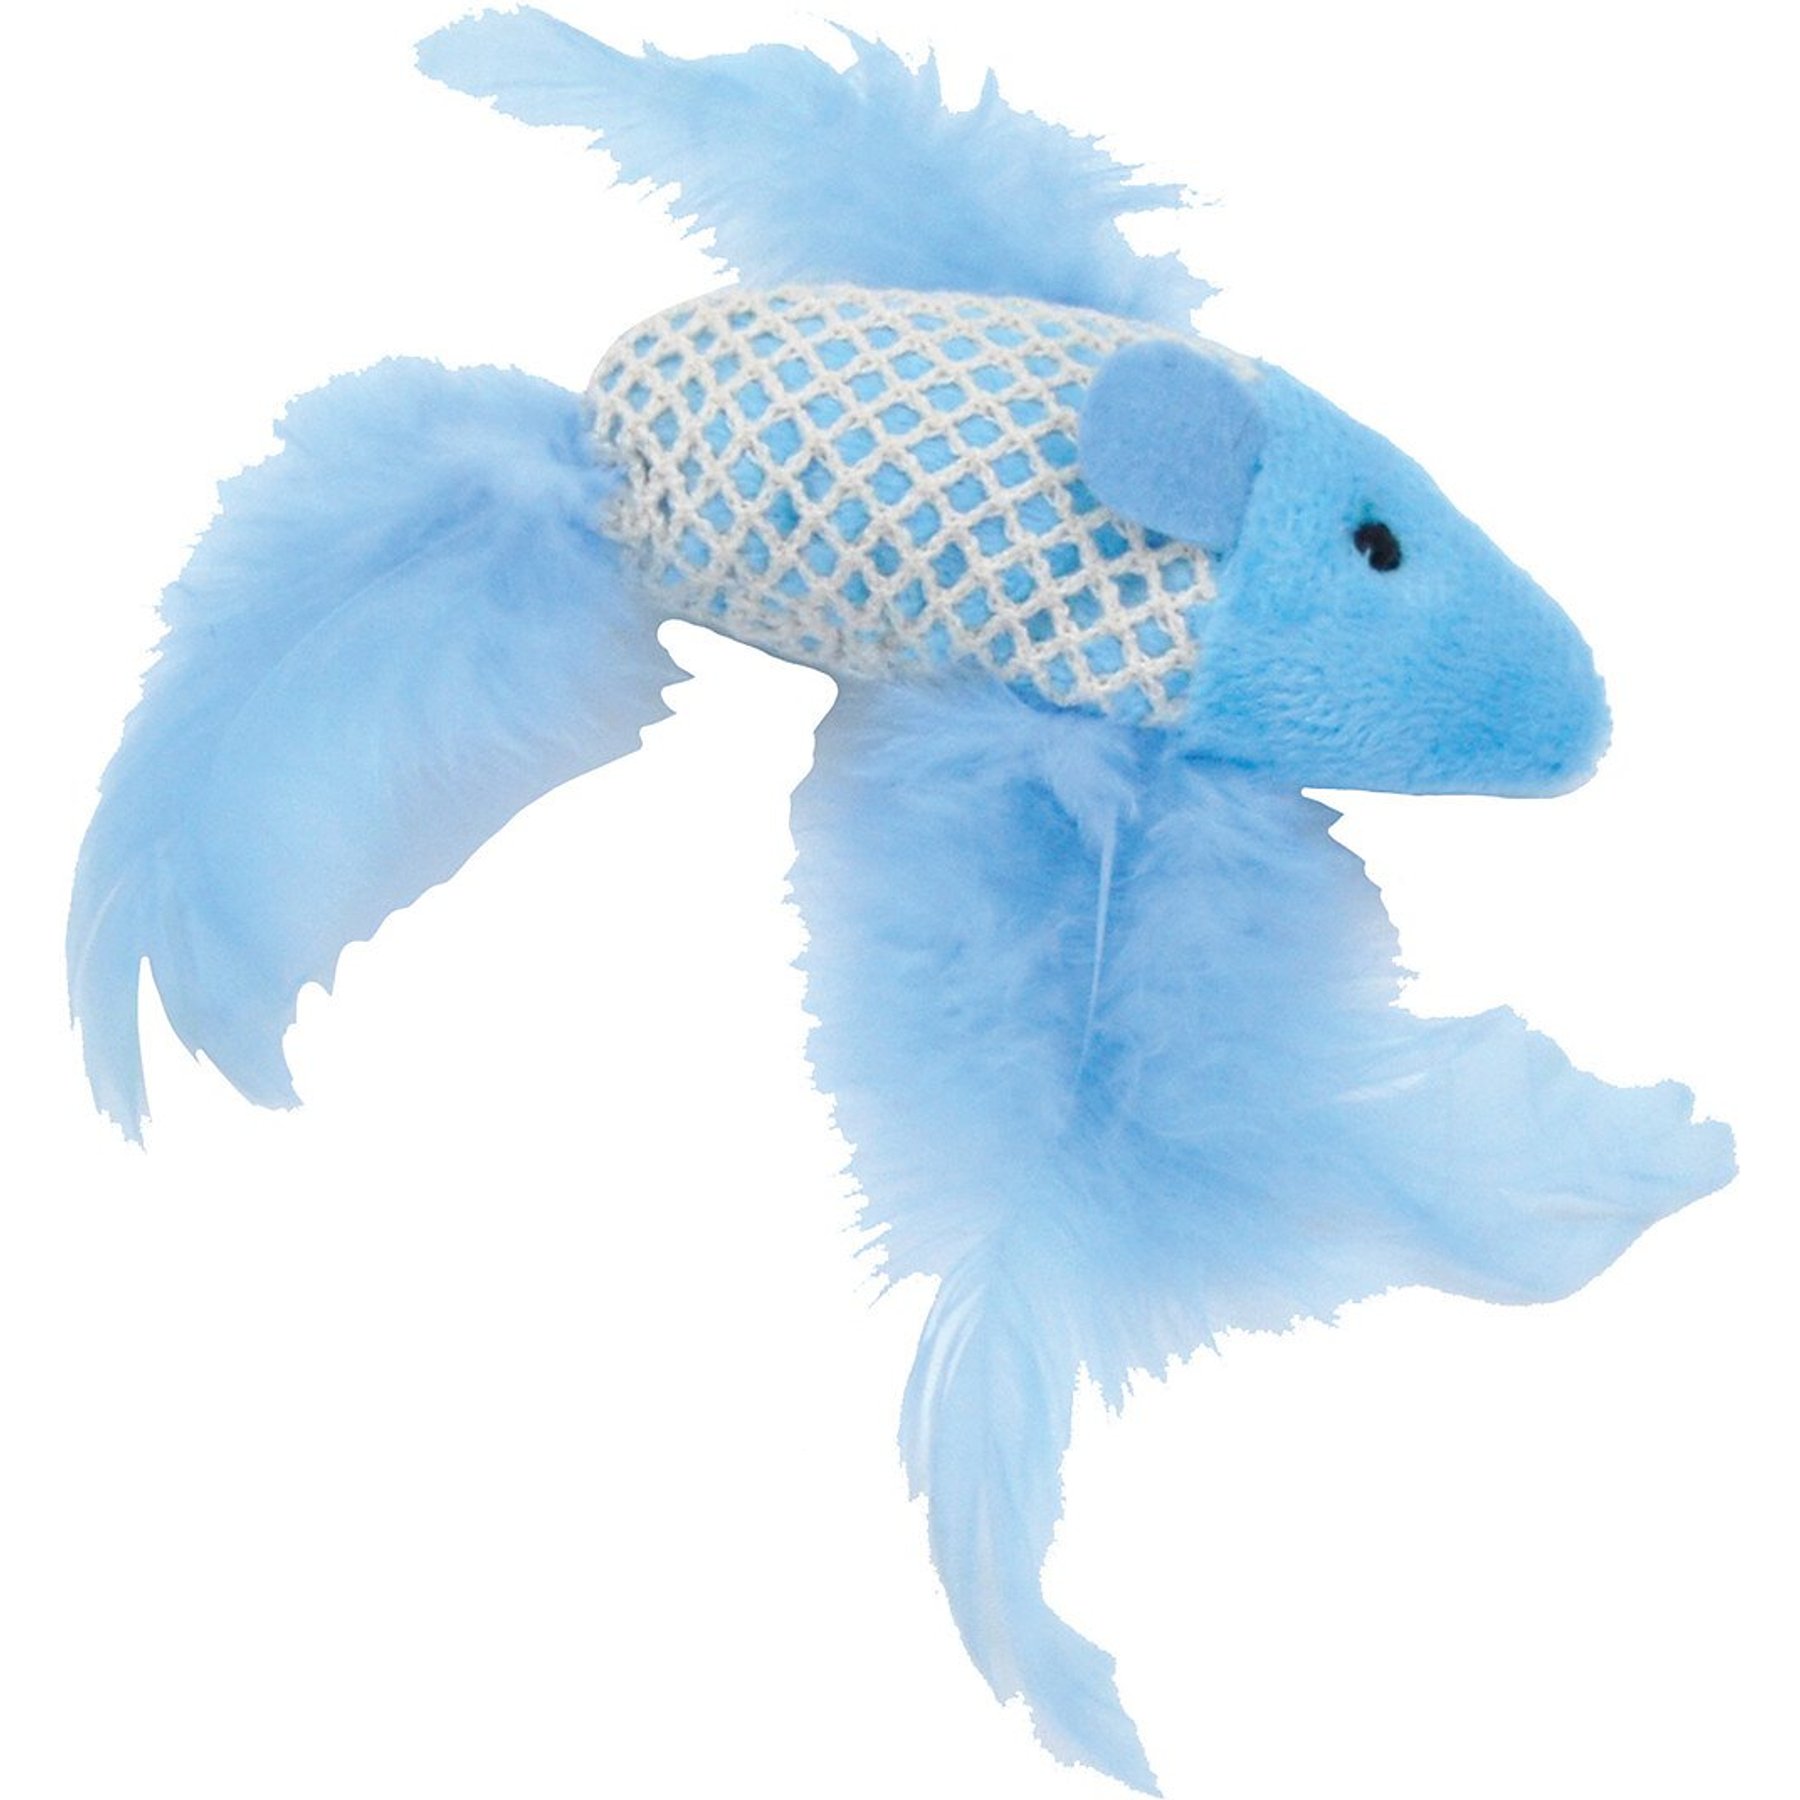 Coastal Pet Products Turbo Fish with Feathers - in Danbury, CT